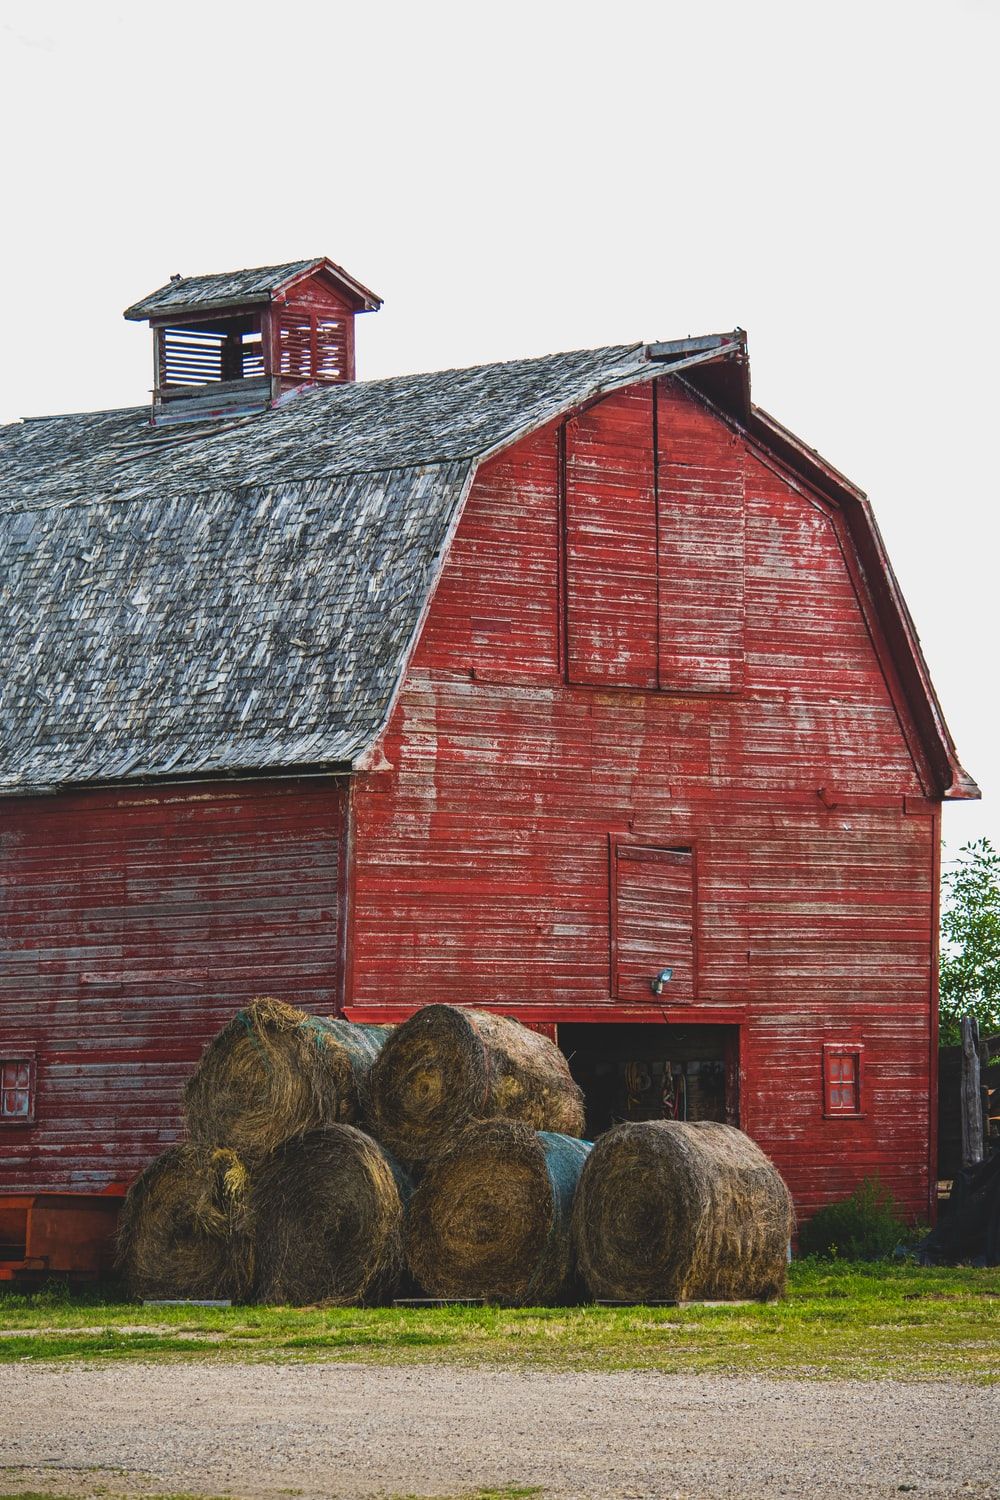 Barn Picture. Download Free Image